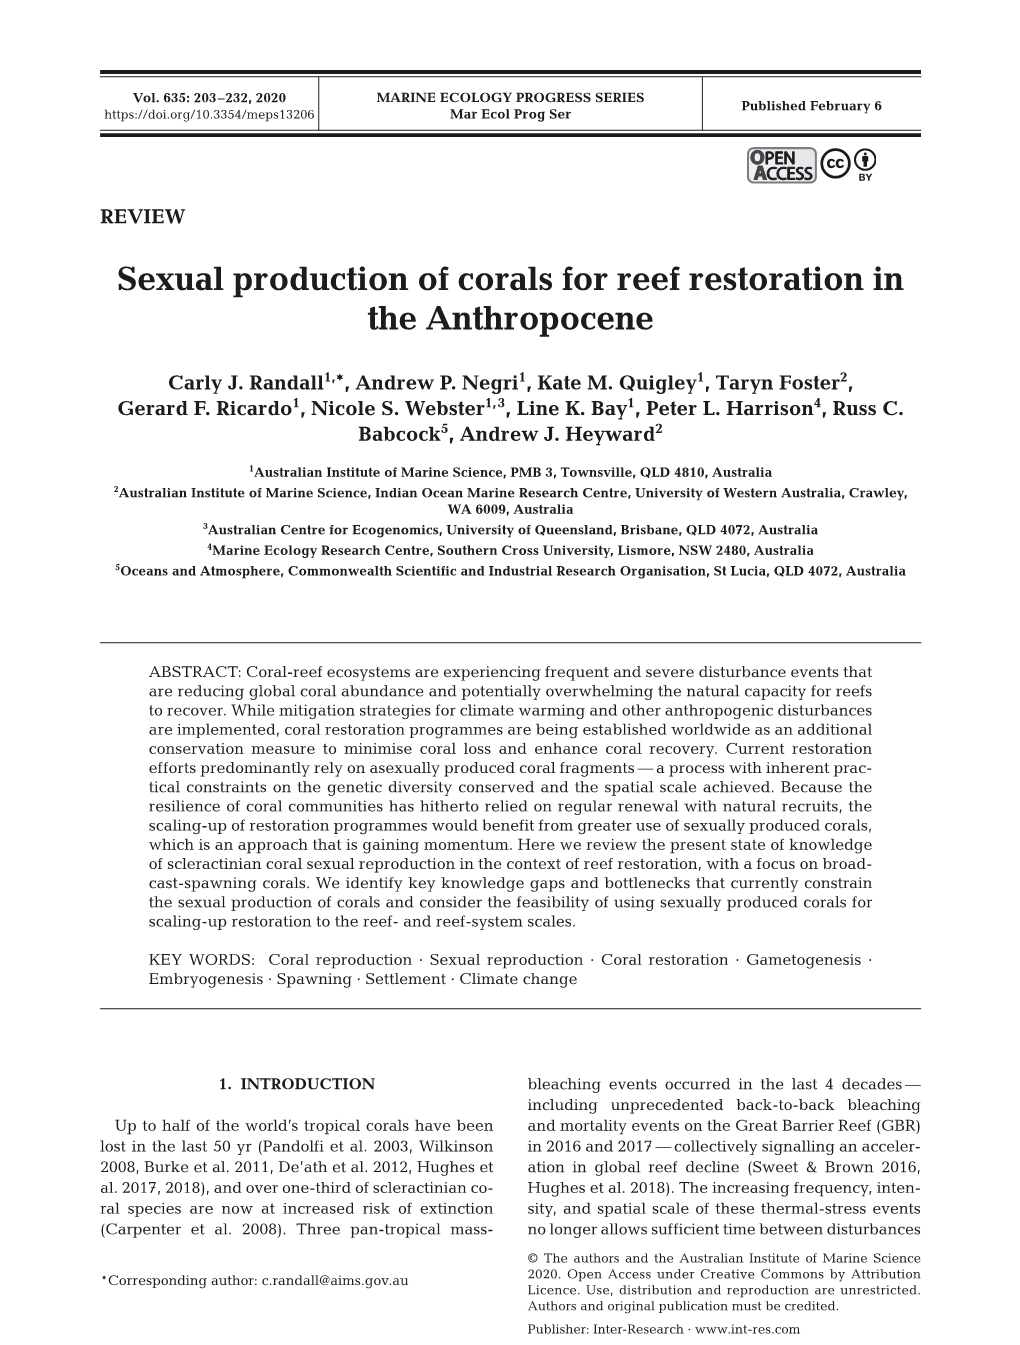 Sexual Production of Corals for Reef Restoration in the Anthropocene